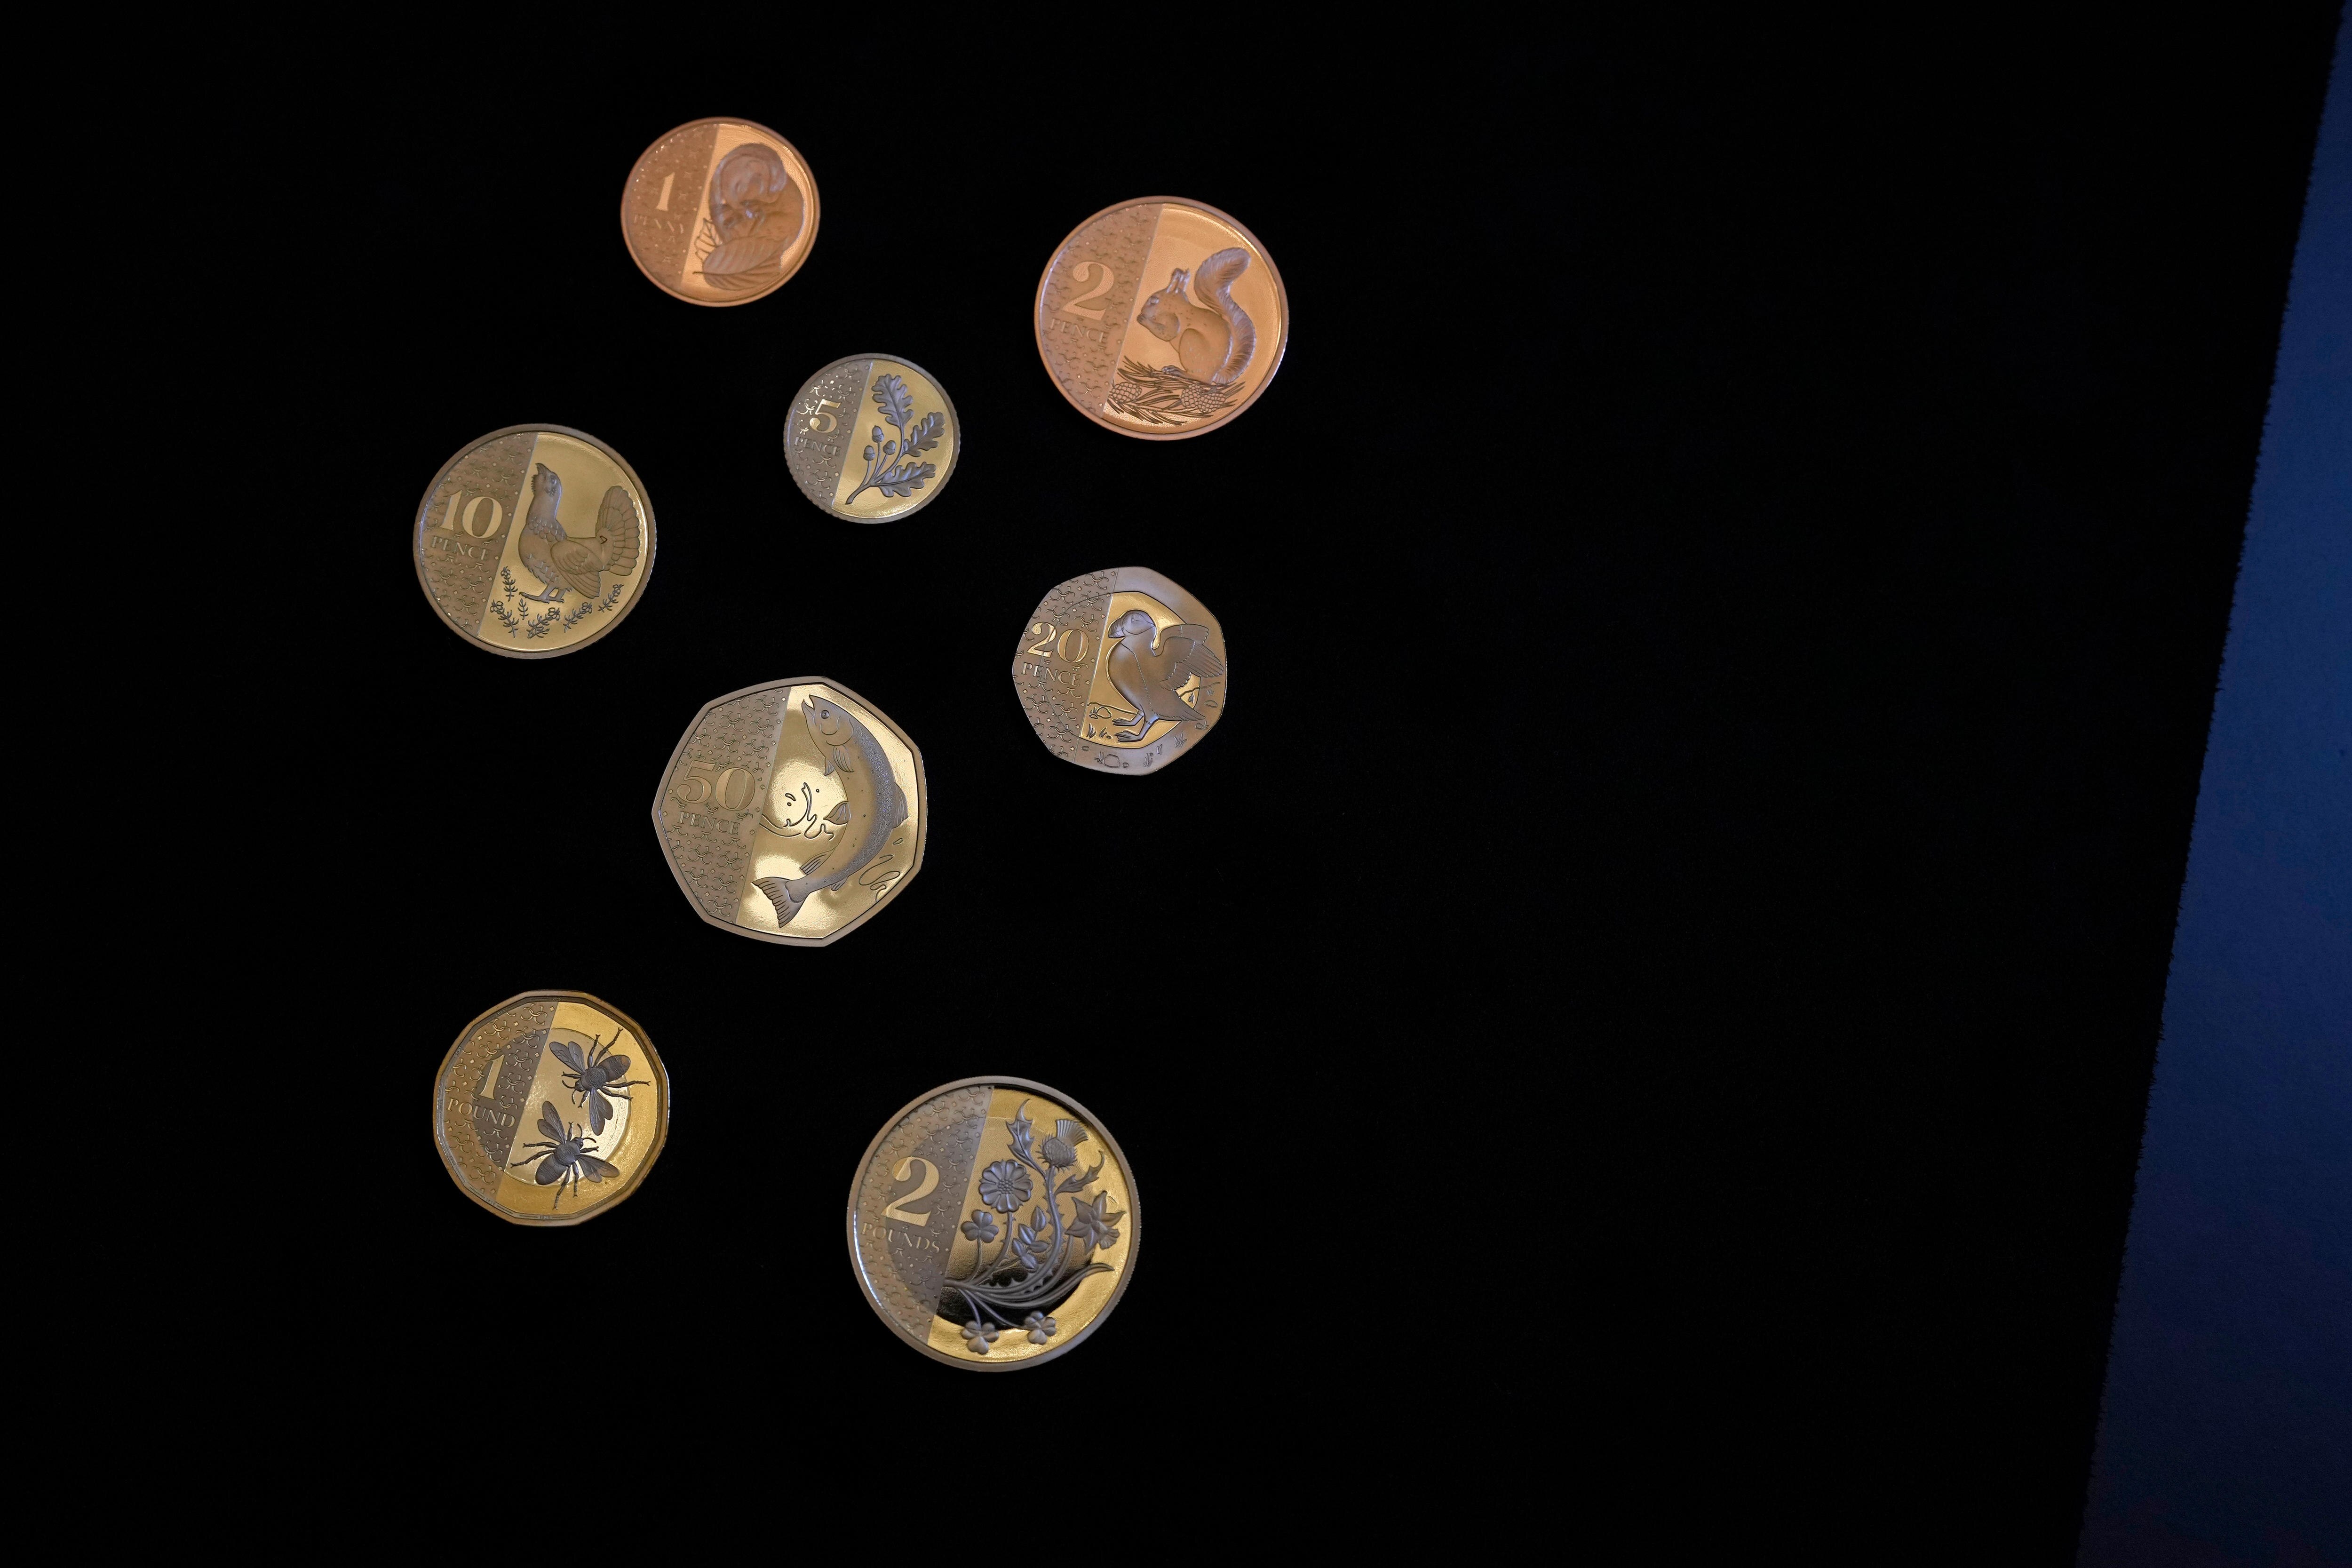 Seven British coins on a black background. 